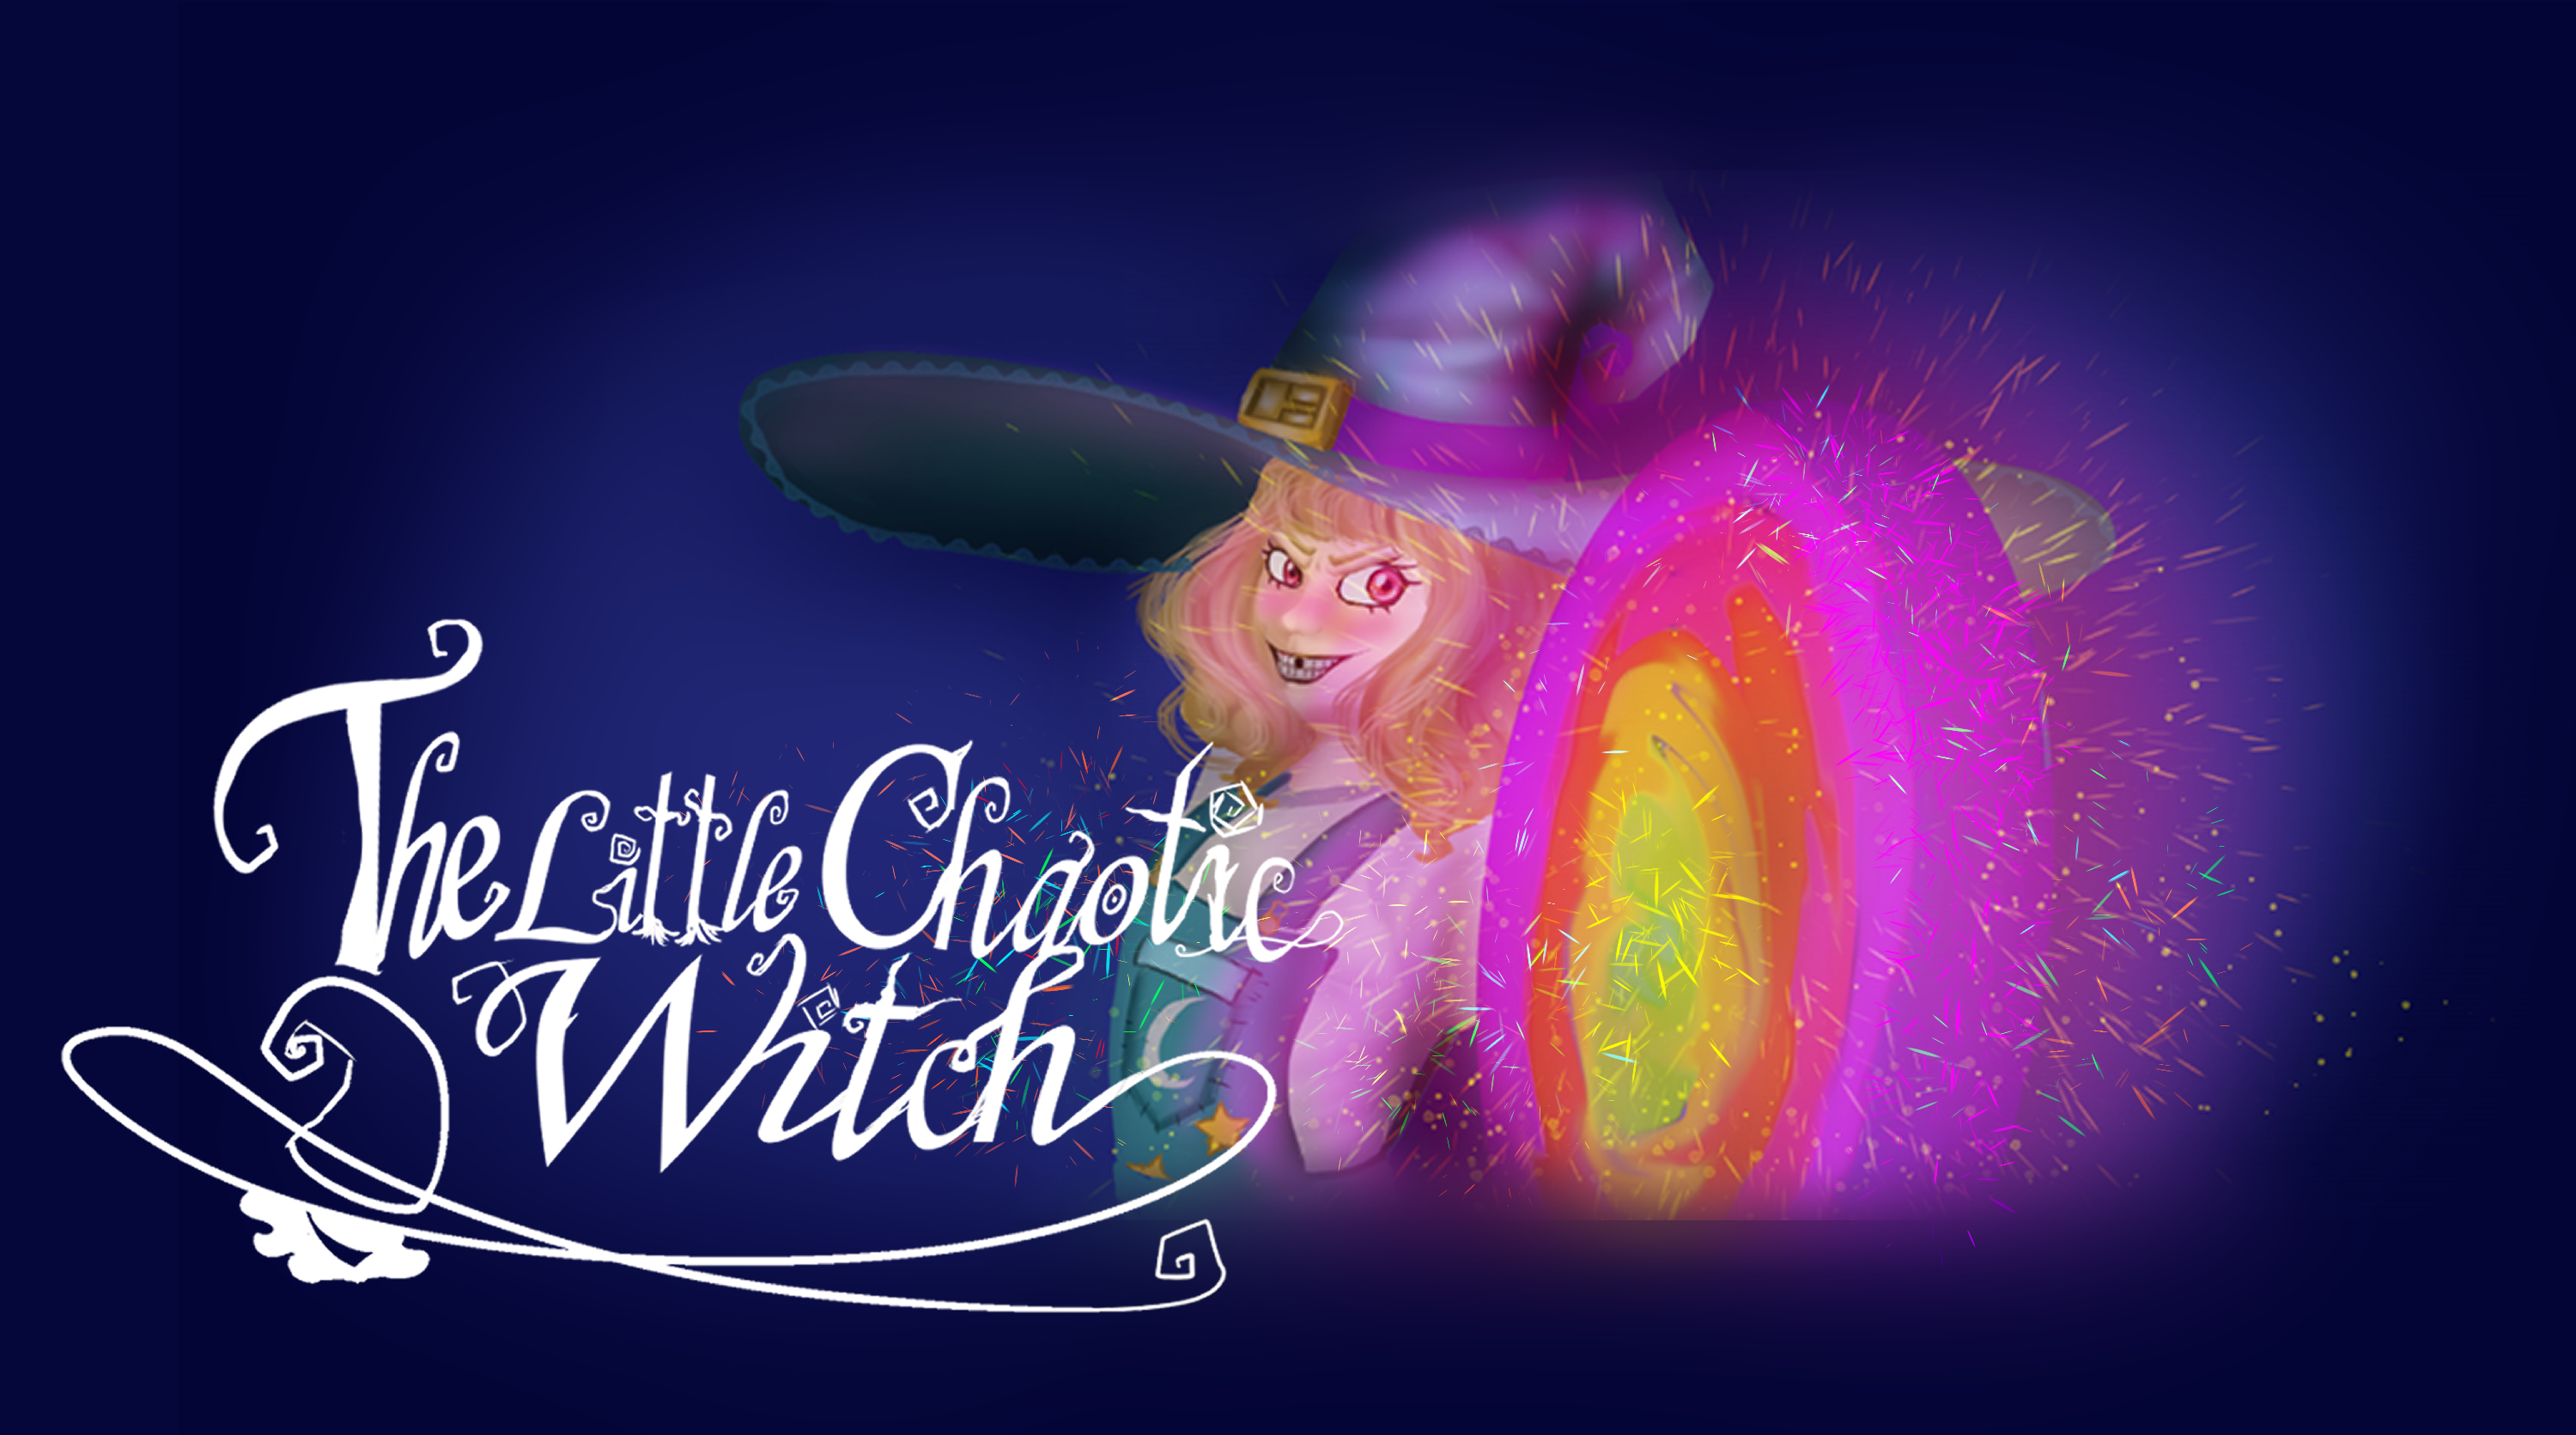 Little Chaotic Witch